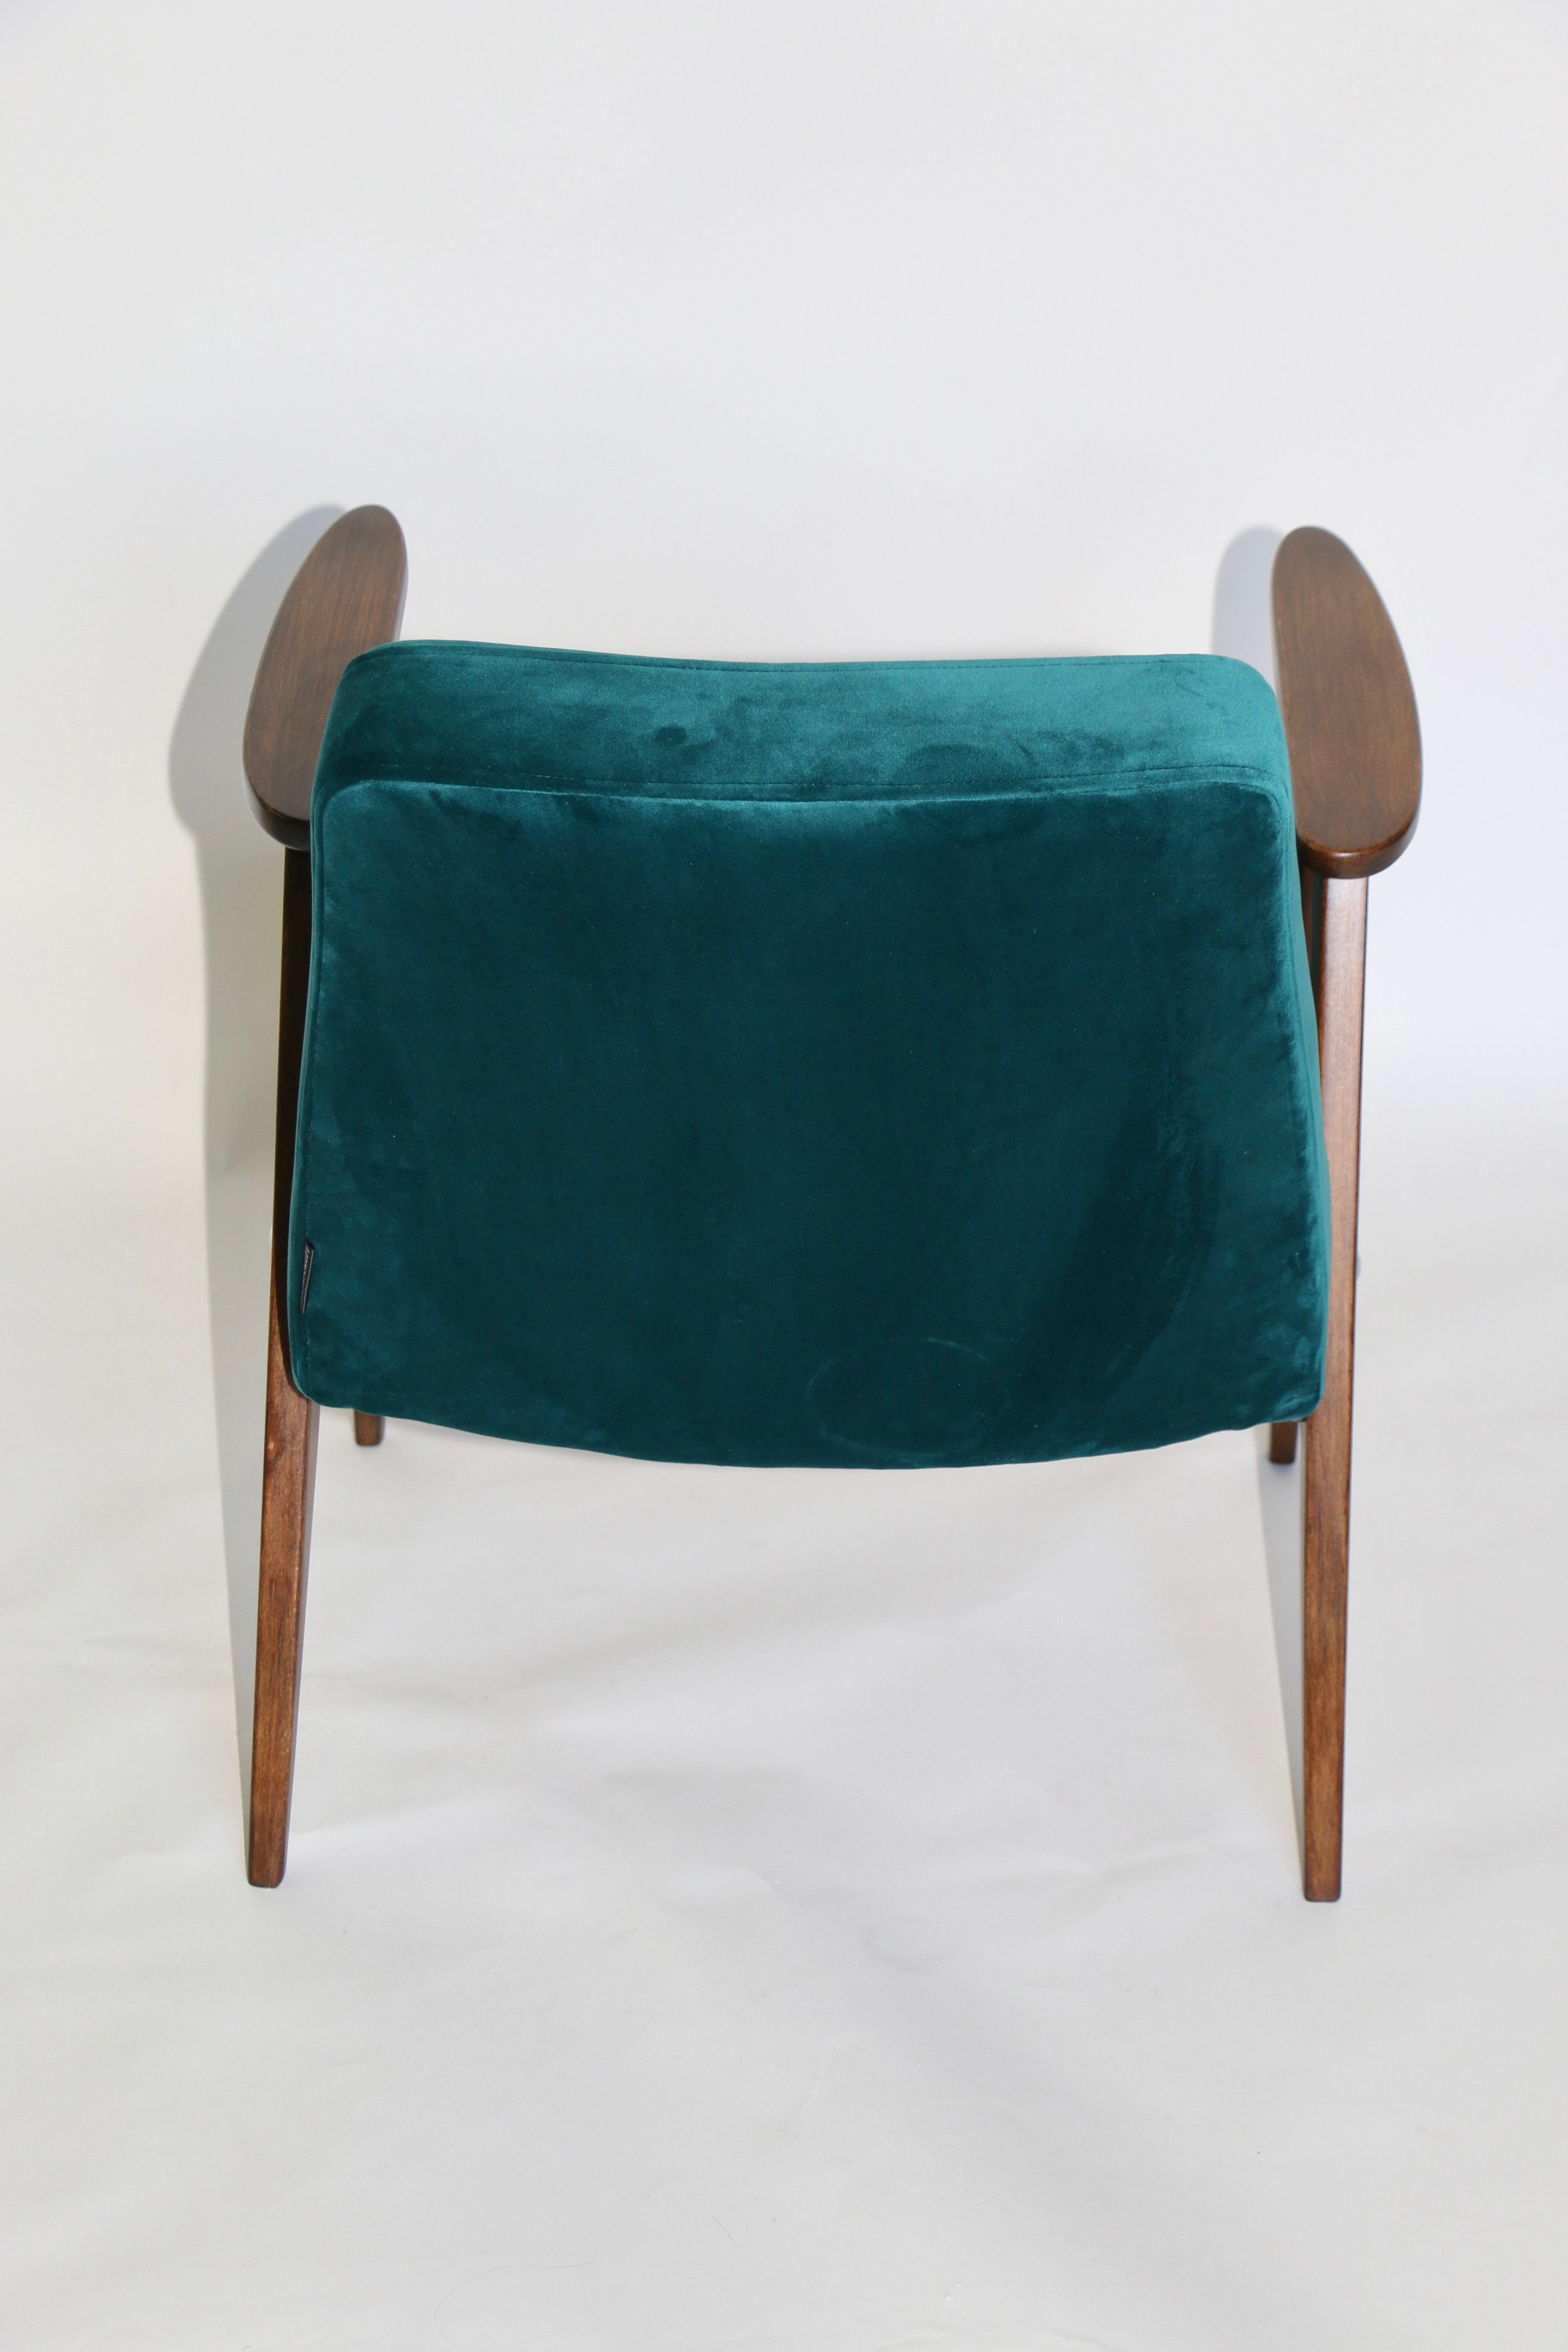 Woodwork Vintage 366 Armchair in Green Velvet from, 1970s For Sale